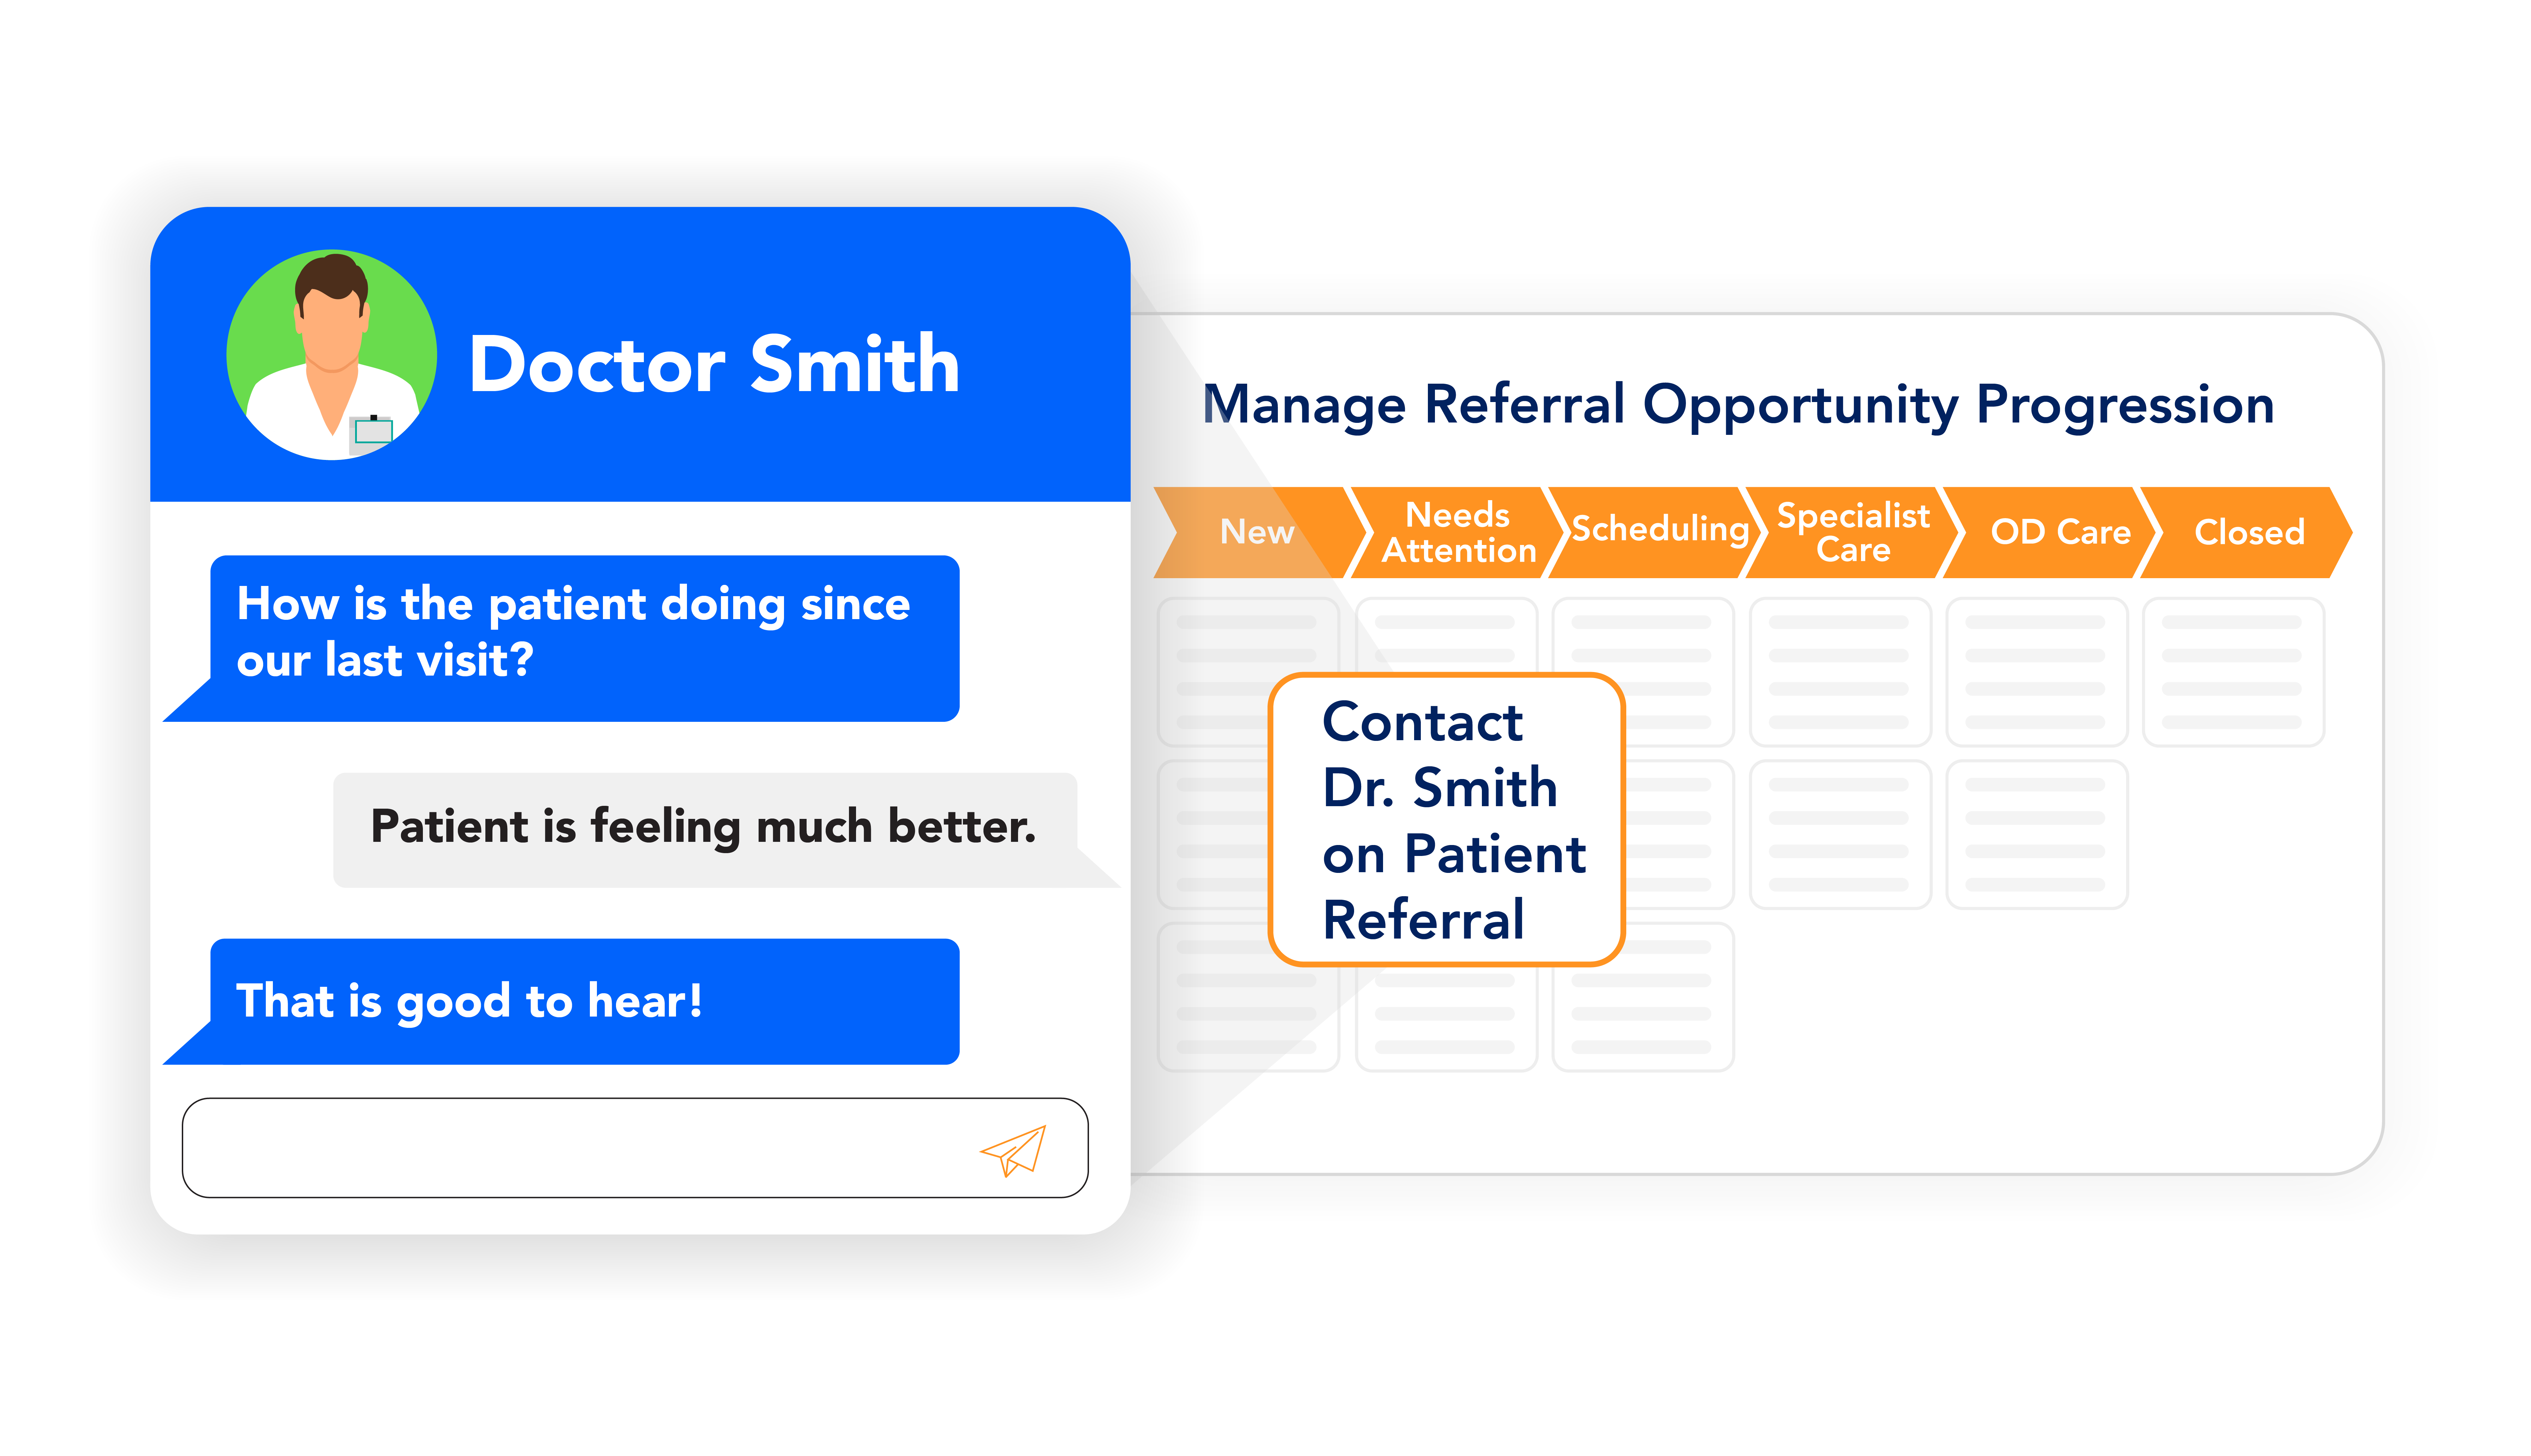 referral care coordination CRM portal with new needs attention scheduling specialist care od care and closed